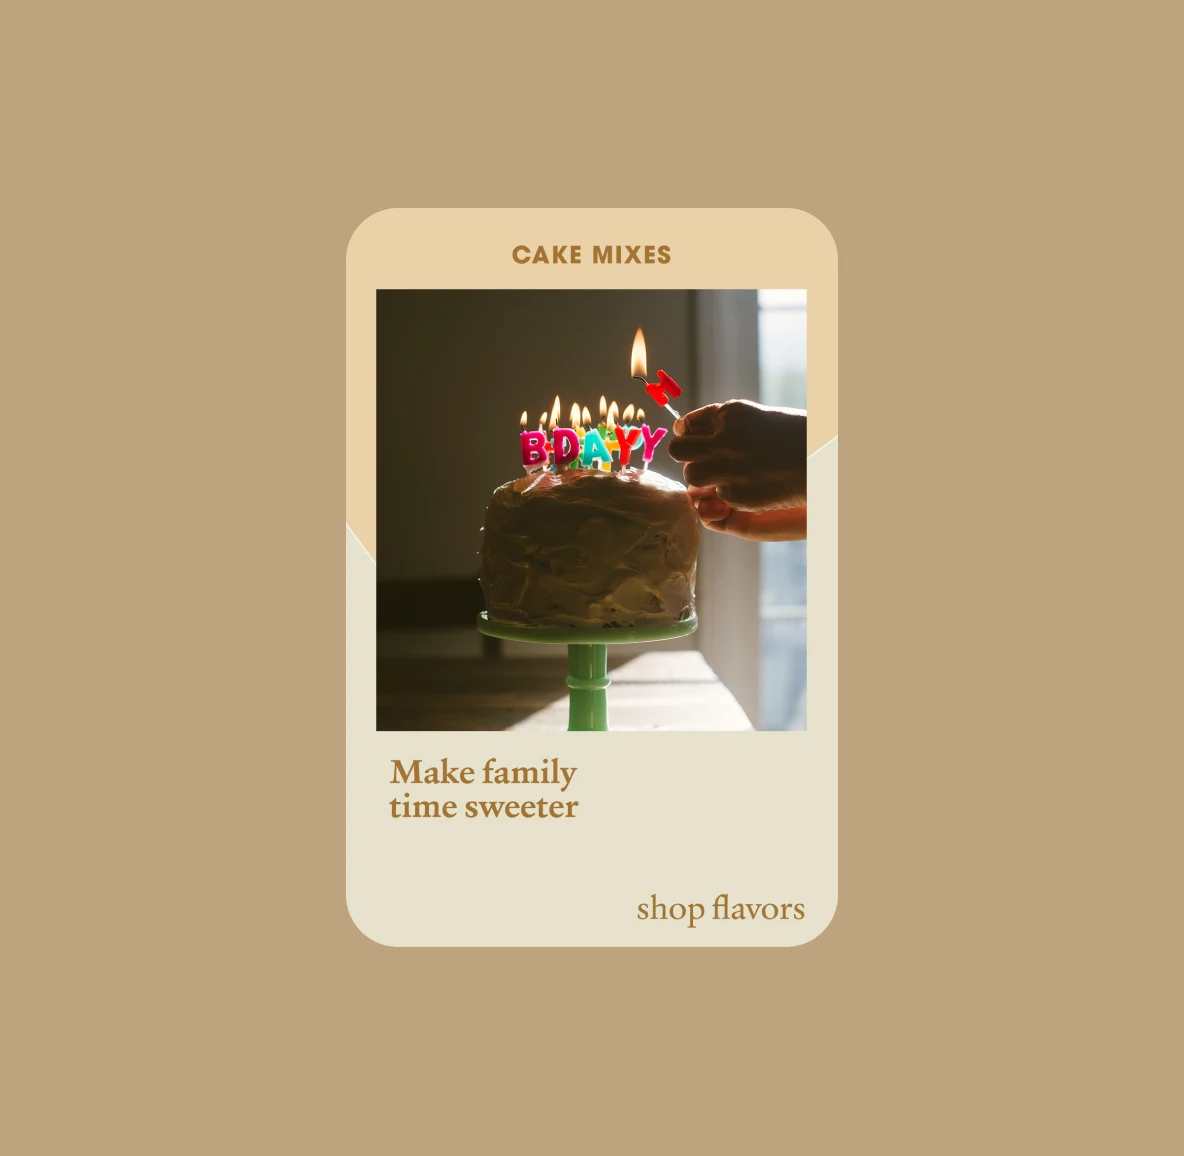 Pin featuring a birthday cake with candles that read “BDAY” with on-screen text that reads: “Make family time sweeter.”